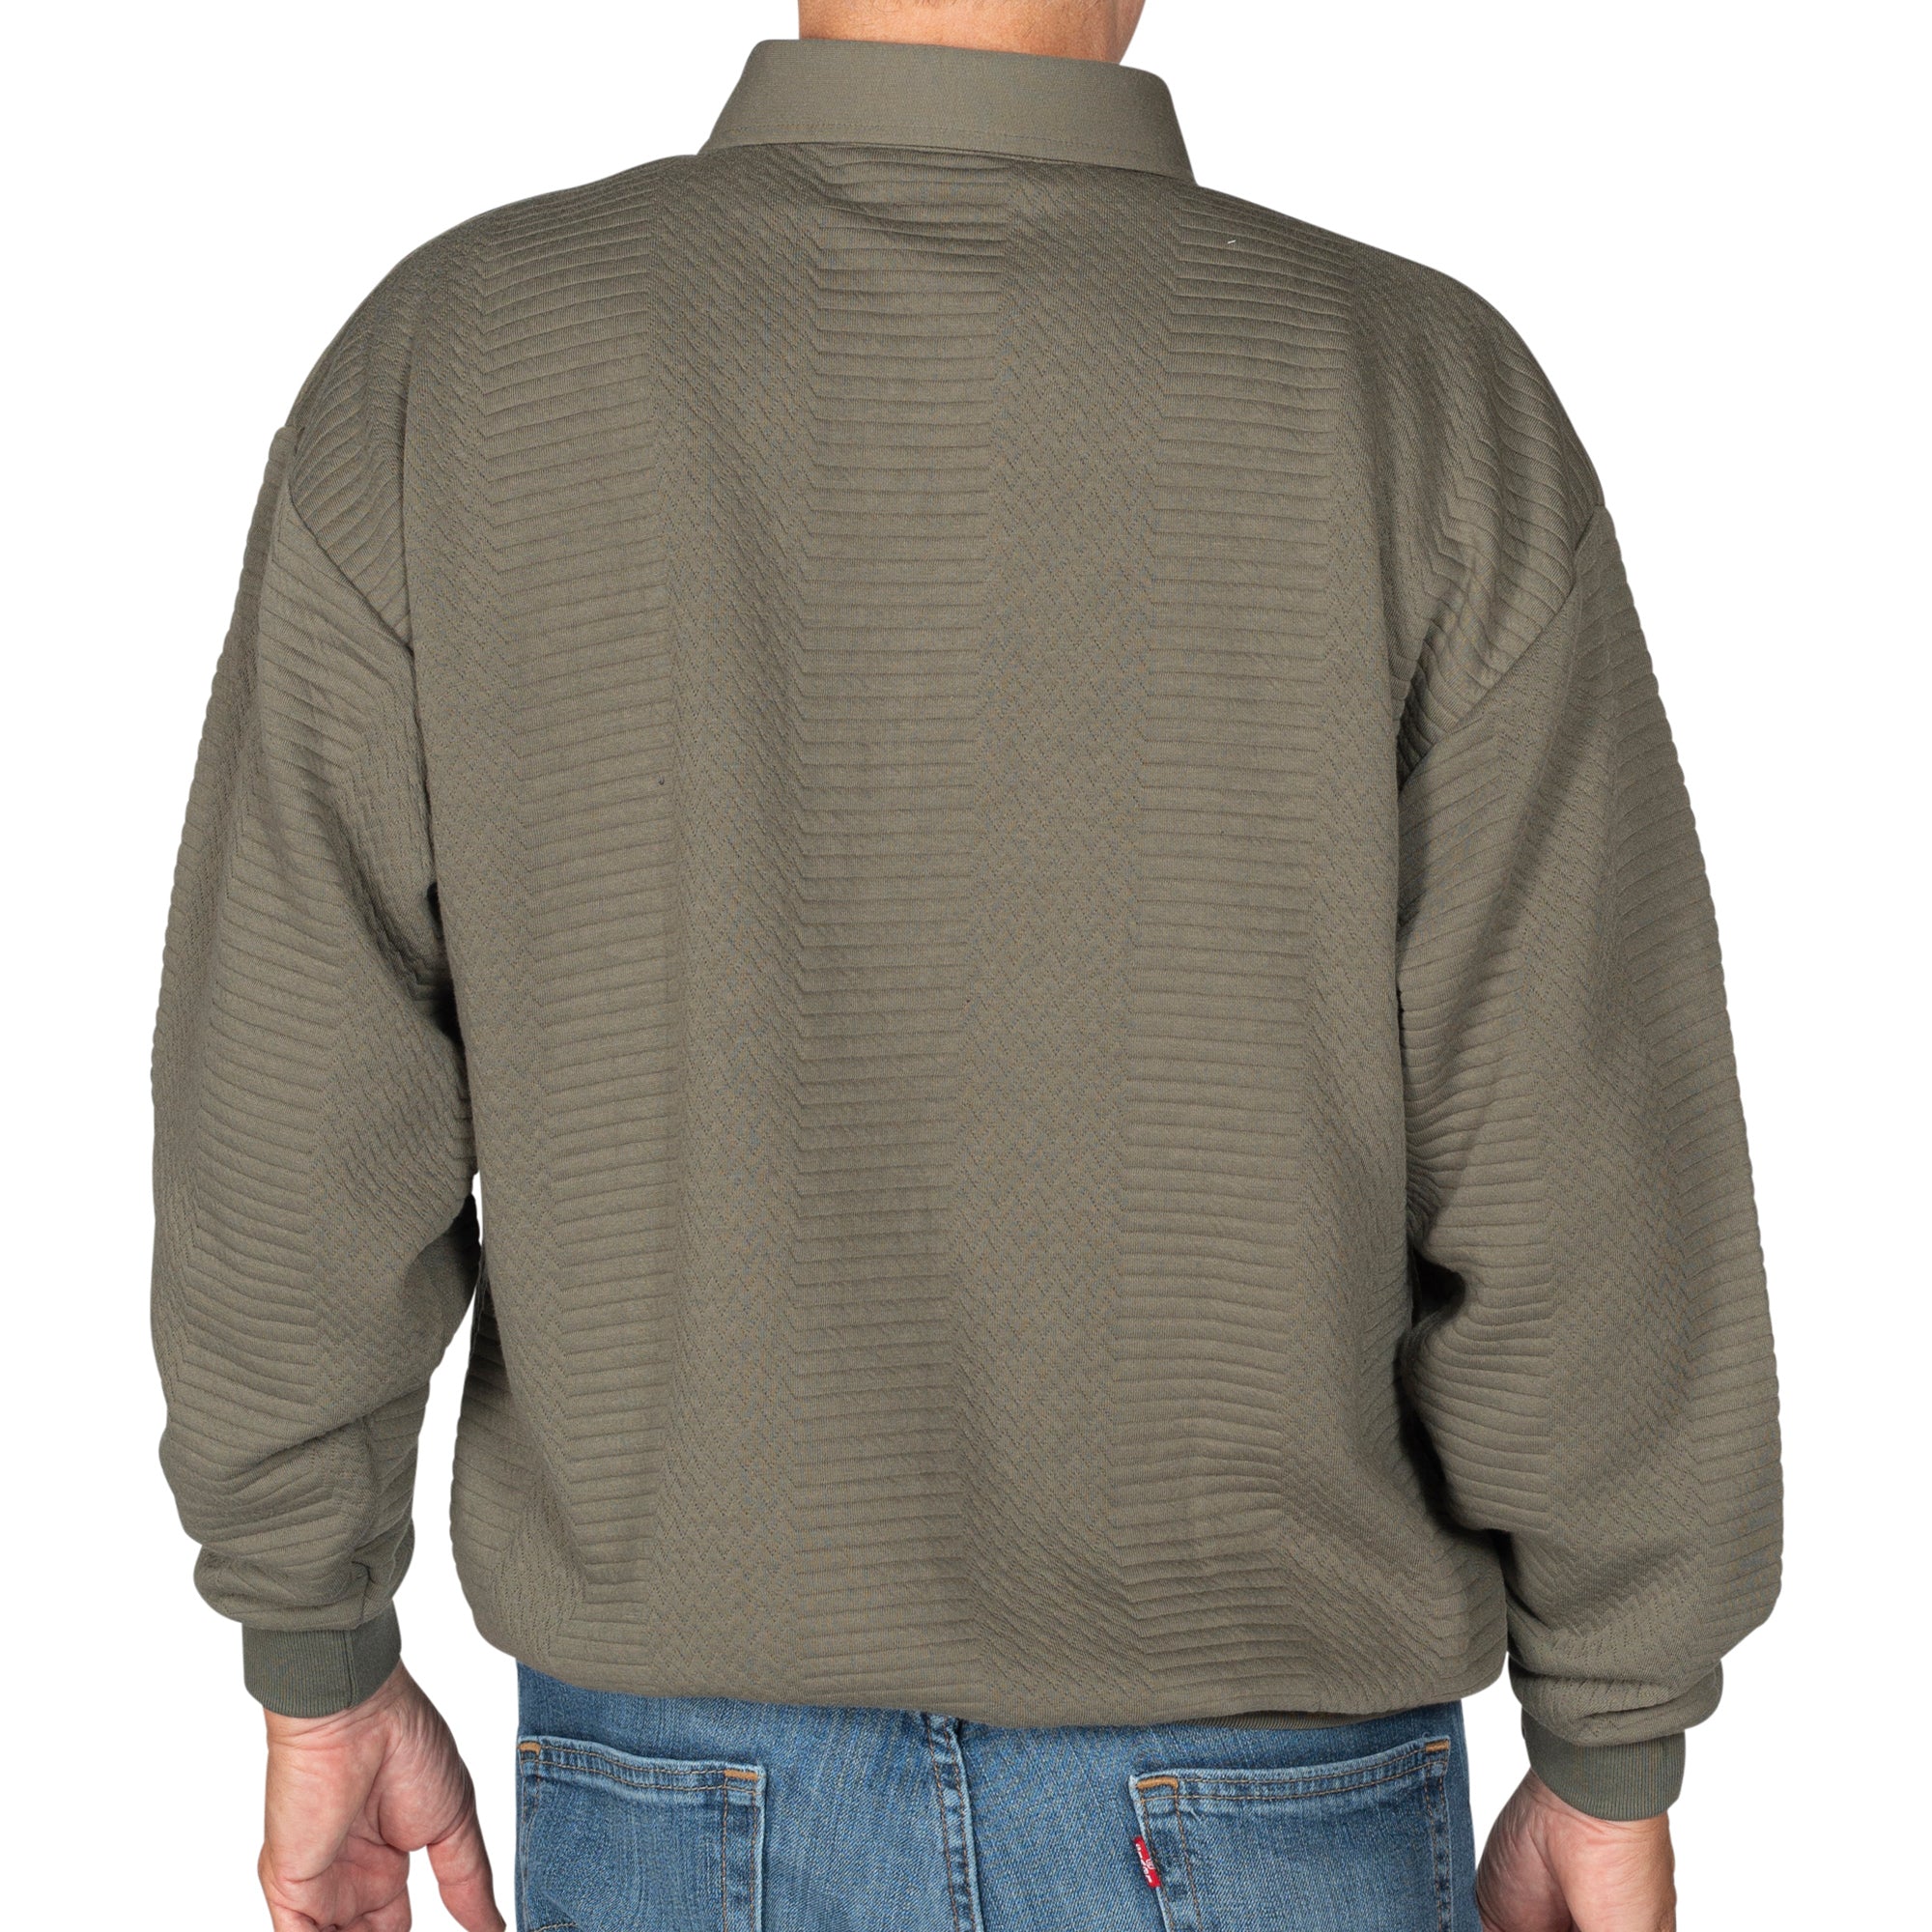 LD Sport Solid Textured Long Sleeve Banded Bottom Shirt - 6094-950 - Olive - Big and Tall